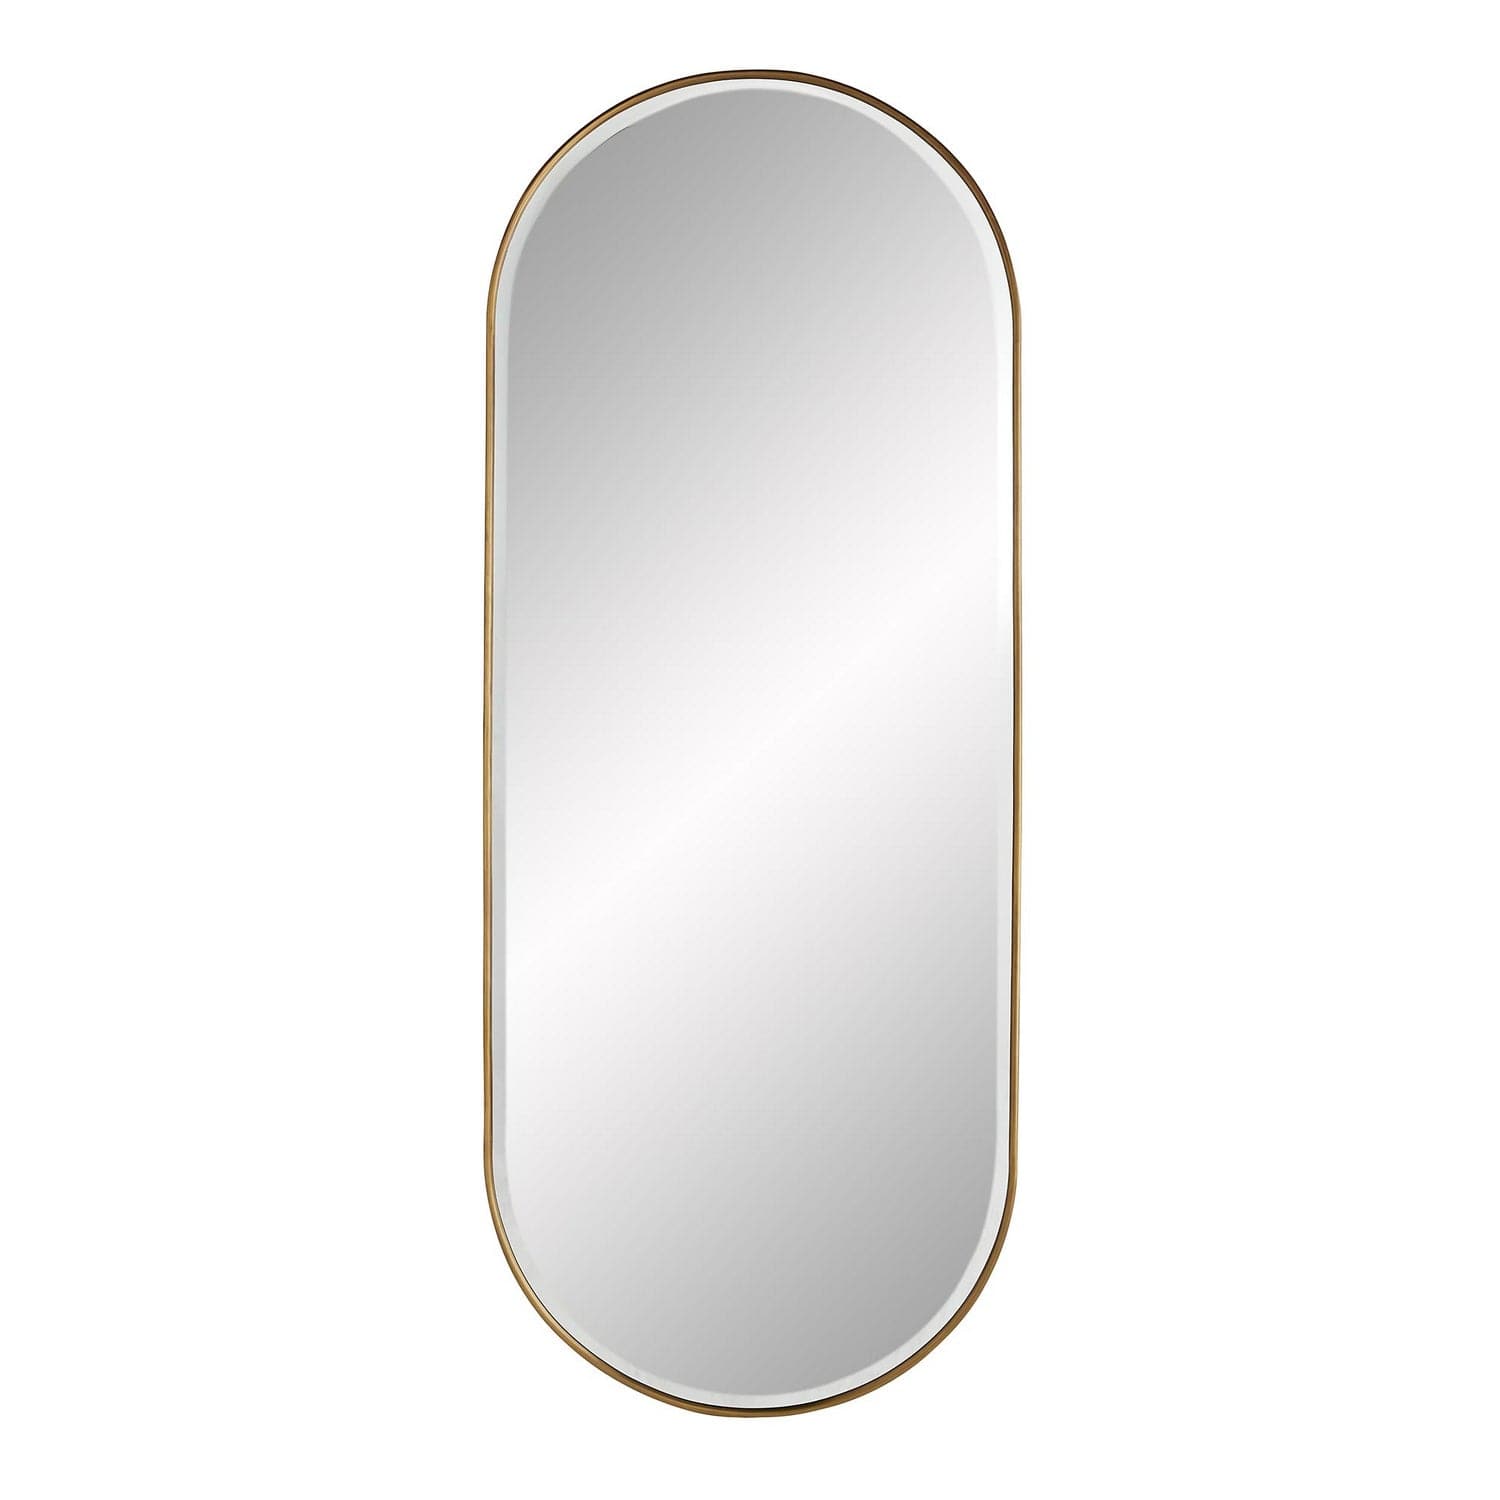 Mirror from the Vaquero collection in Vintage Brass finish